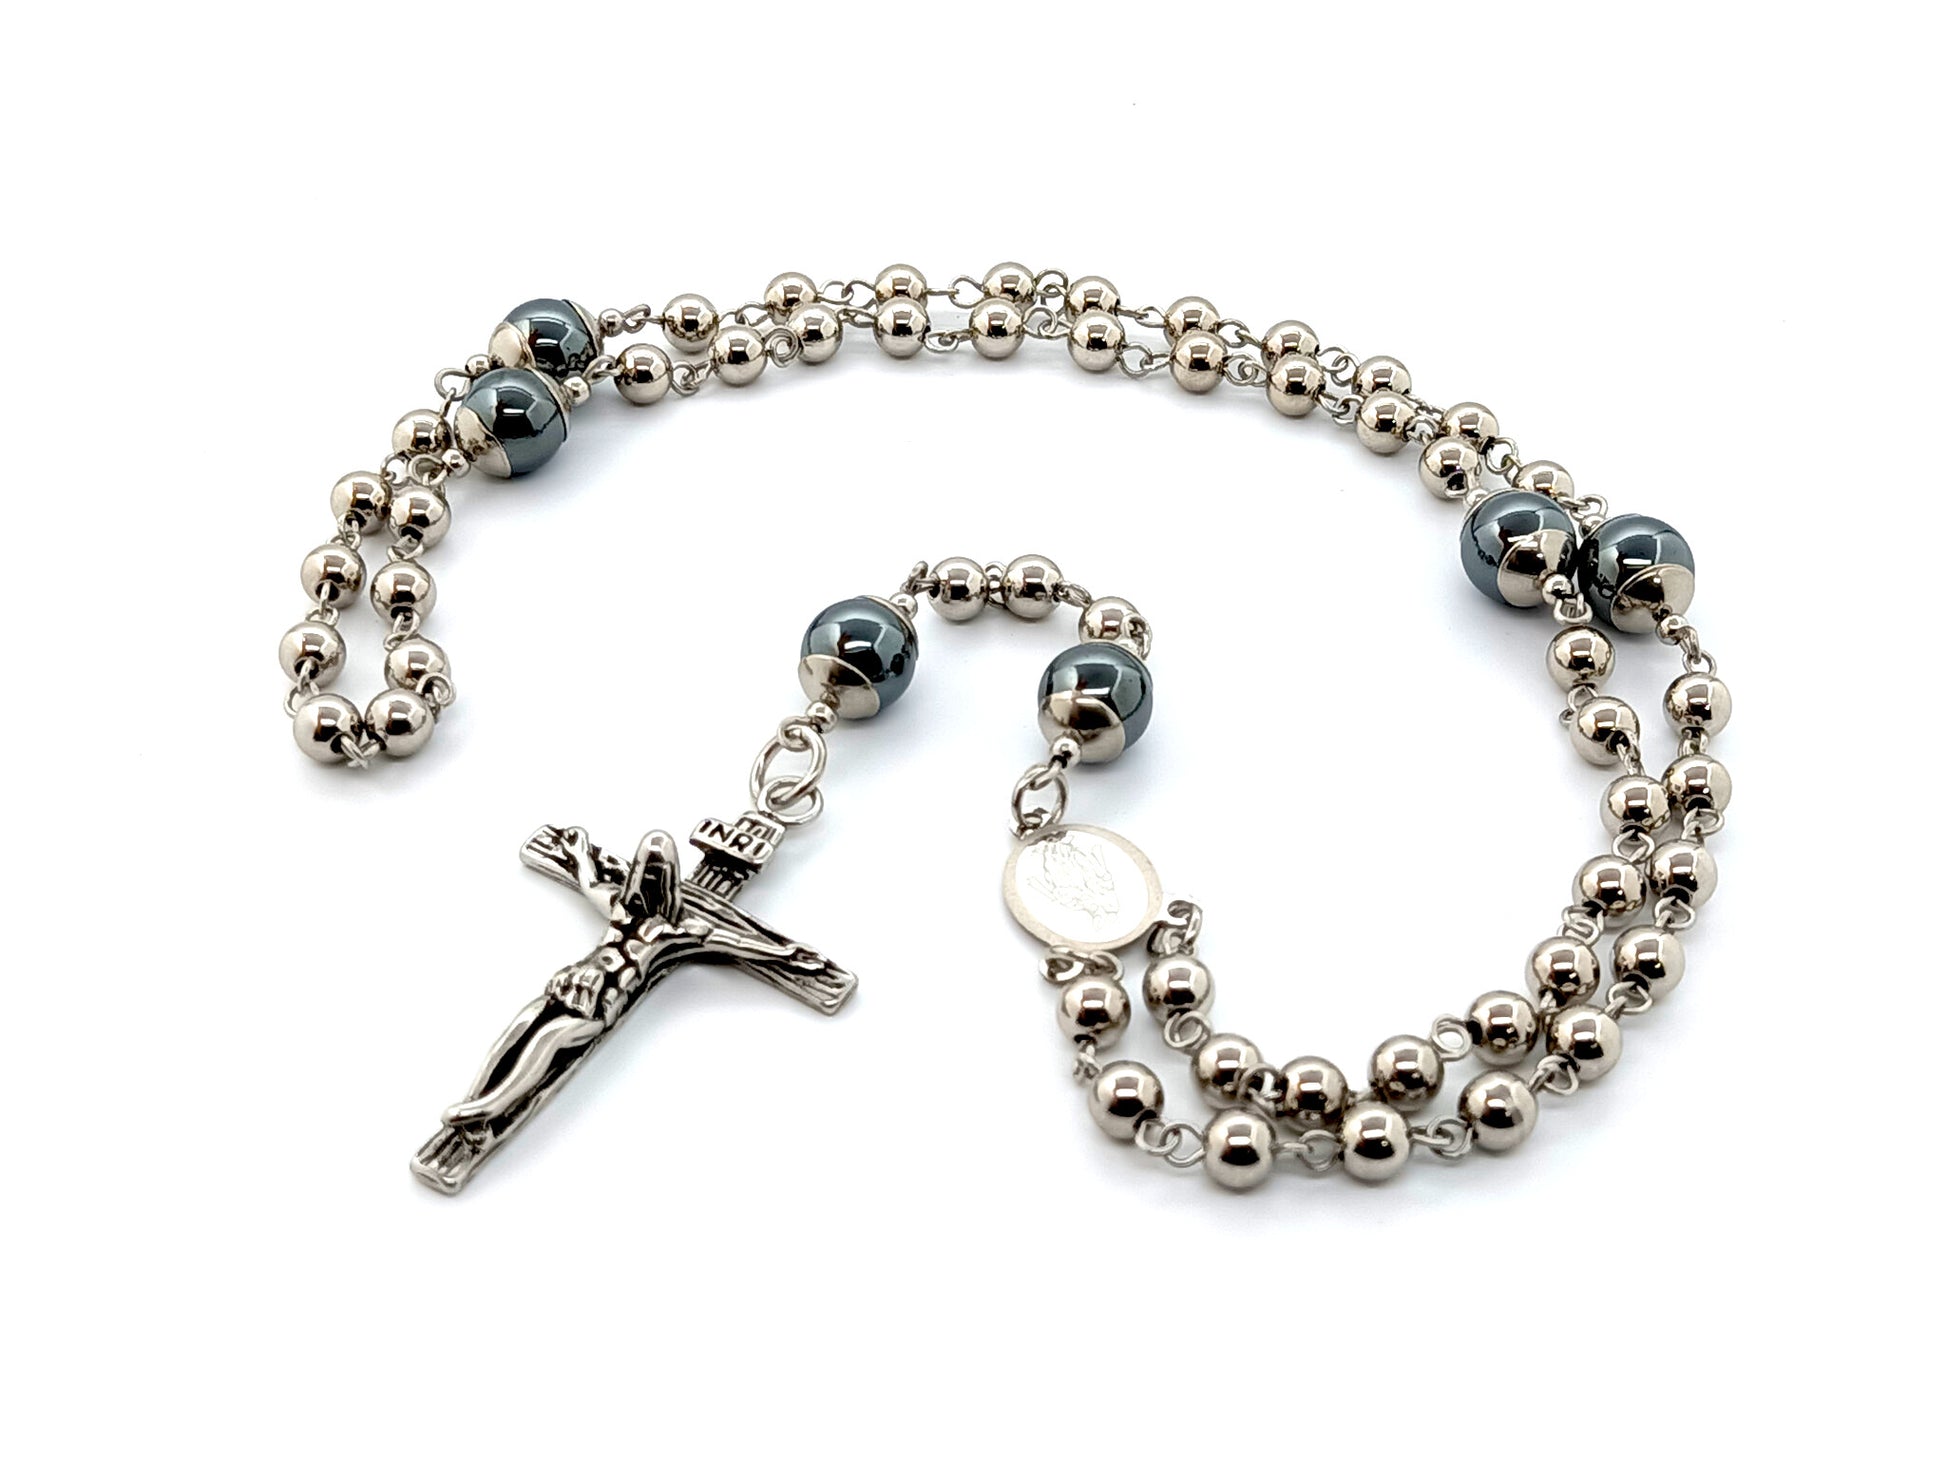 Miraculous medal unique rosary beads with hematite gemstone and stainless steel beads and stainless steel crucifix and medal.